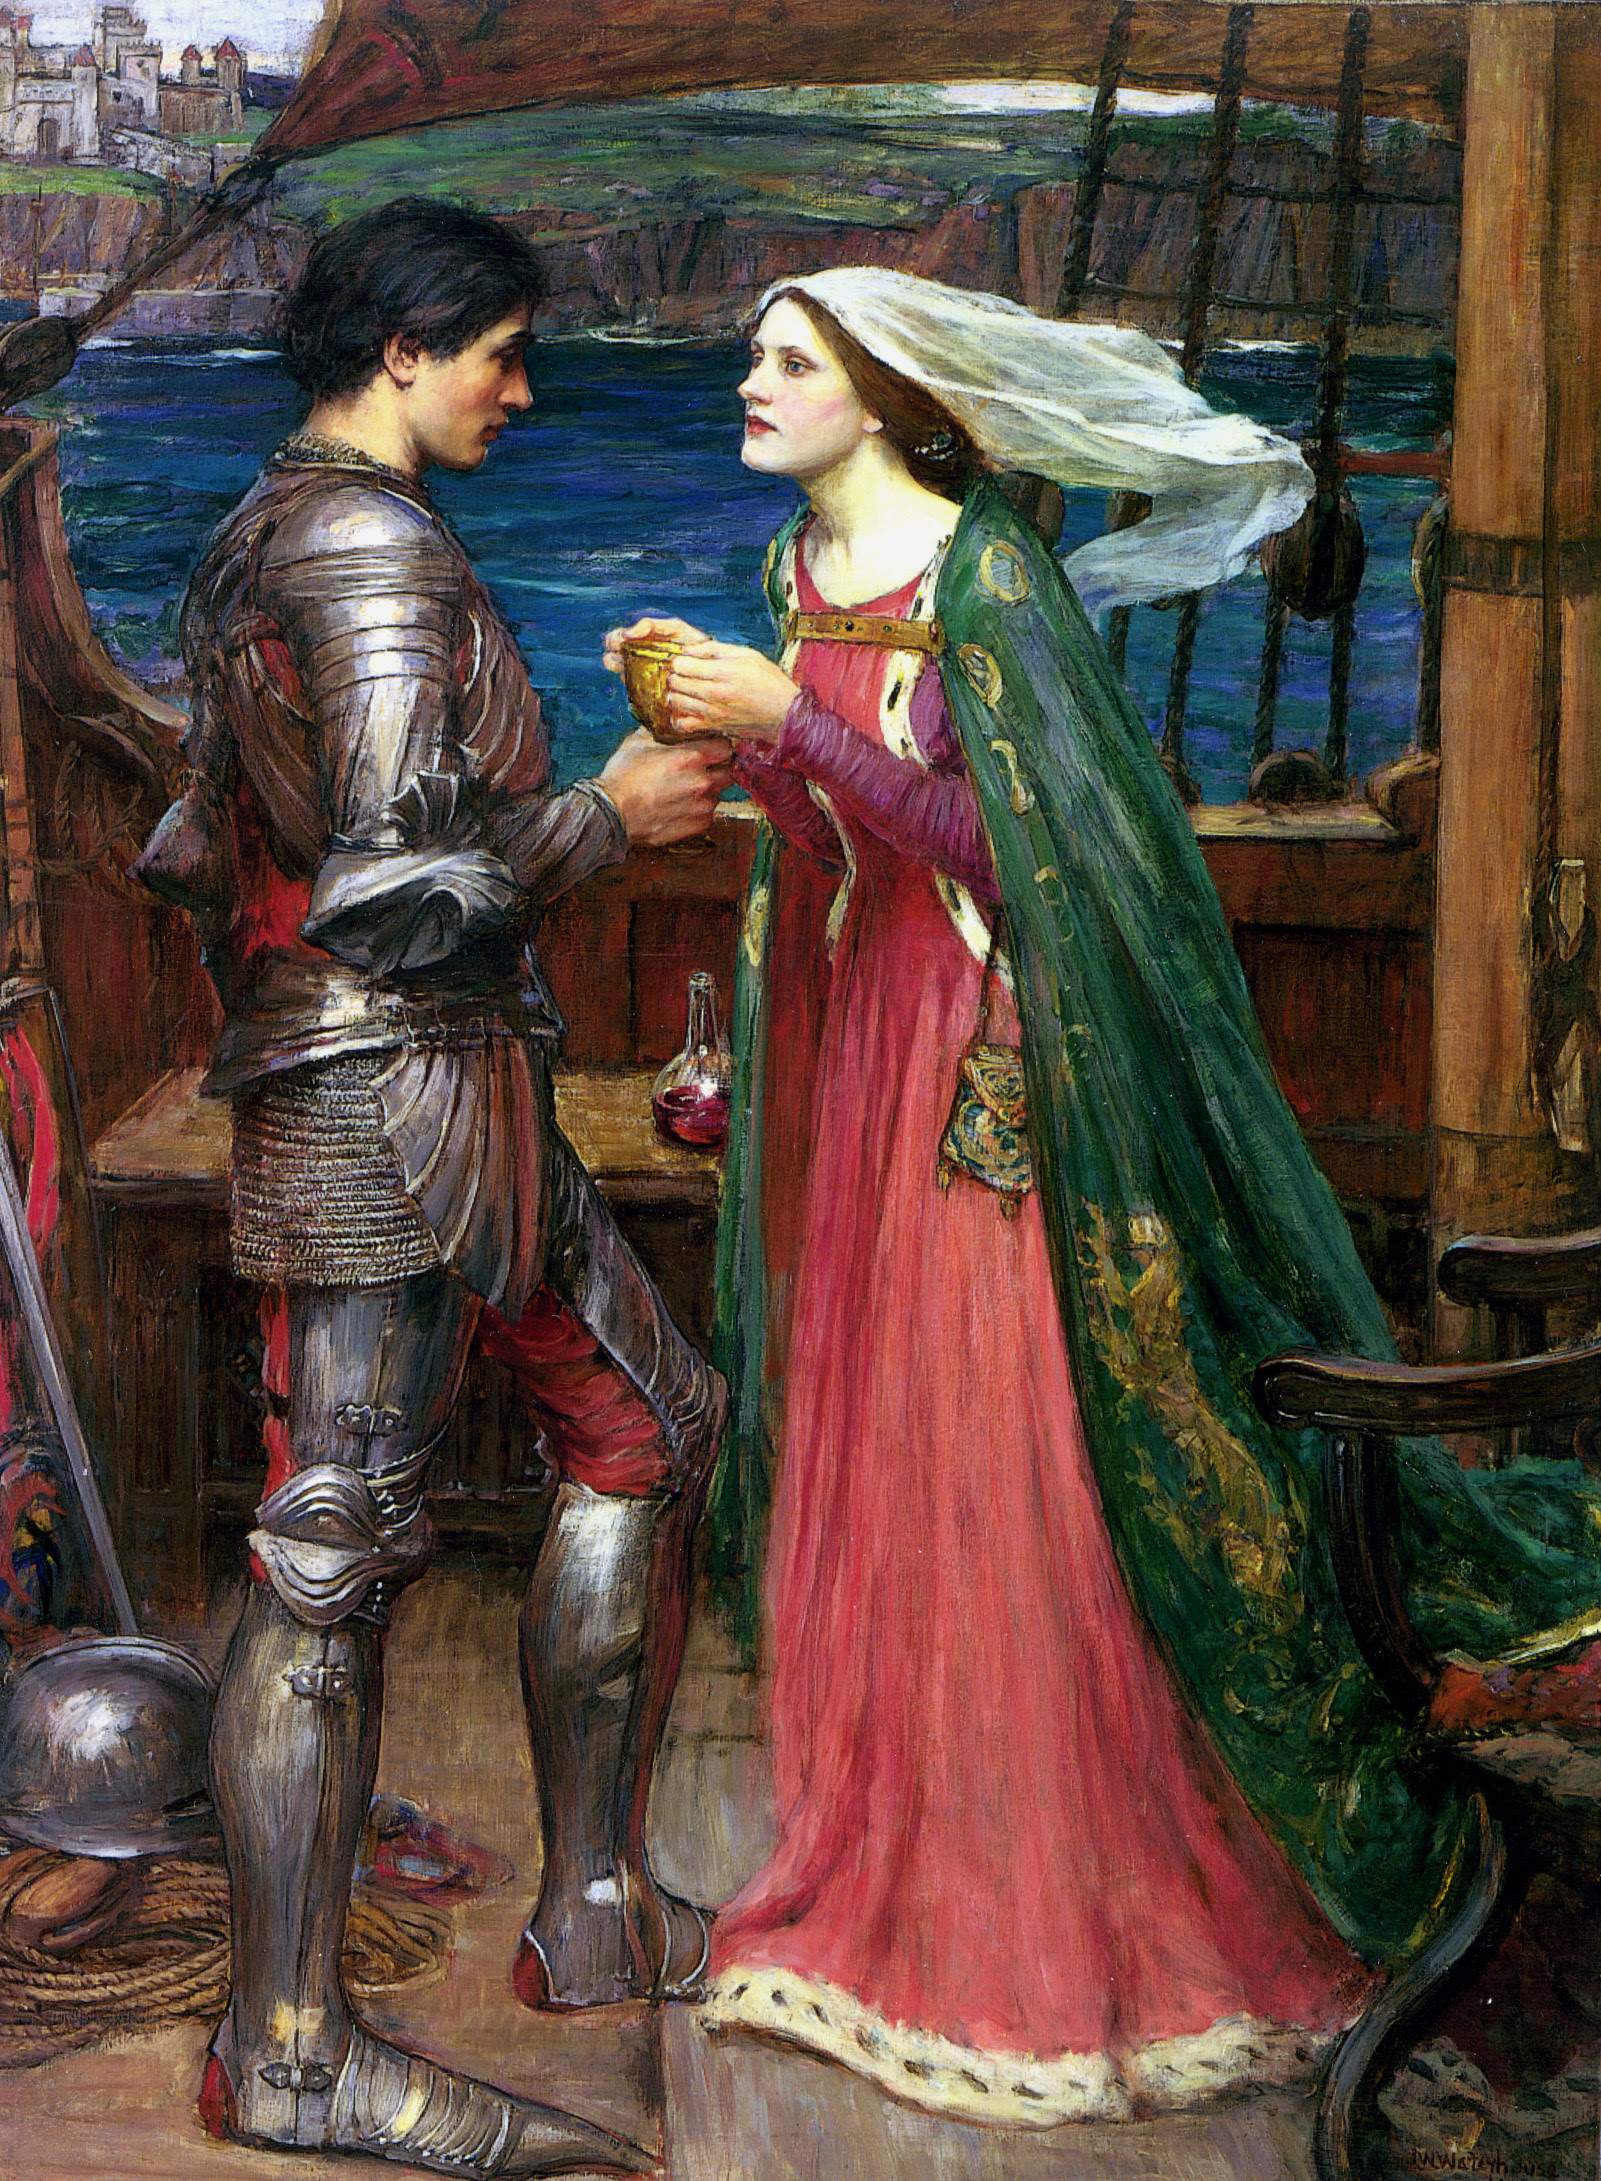 http://upload.wikimedia.org/wikipedia/commons/1/13/John_william_waterhouse_tristan_and_isolde_with_the_potion.jpg